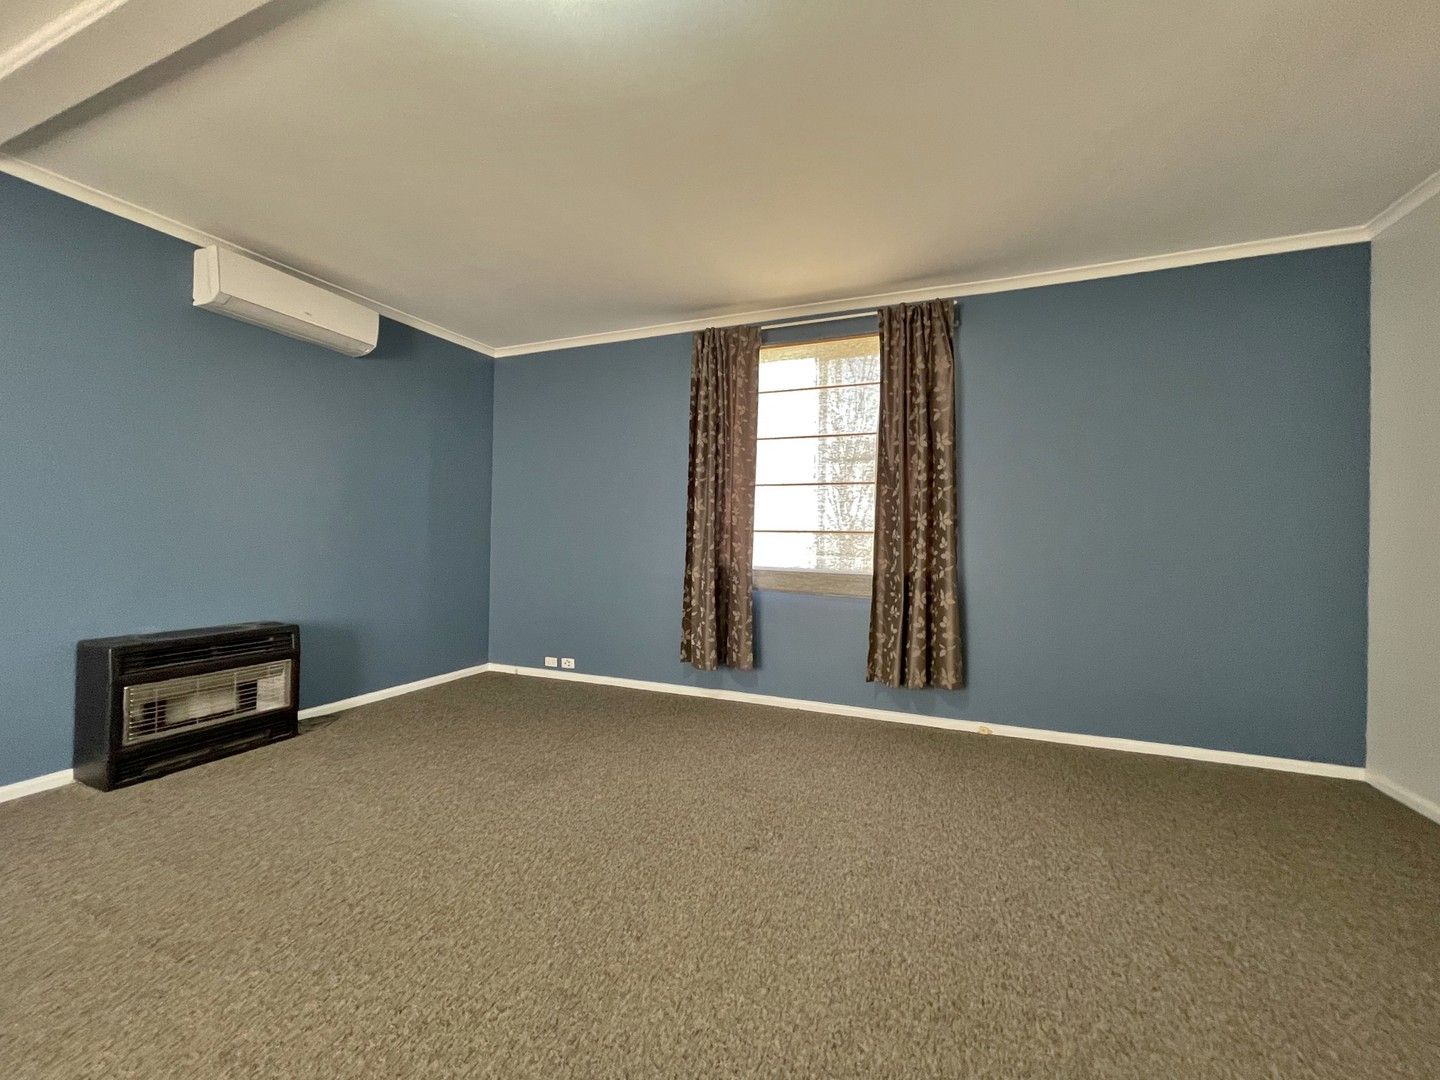 2 bedrooms Apartment / Unit / Flat in 5/31 Wombat Street YOUNG NSW, 2594